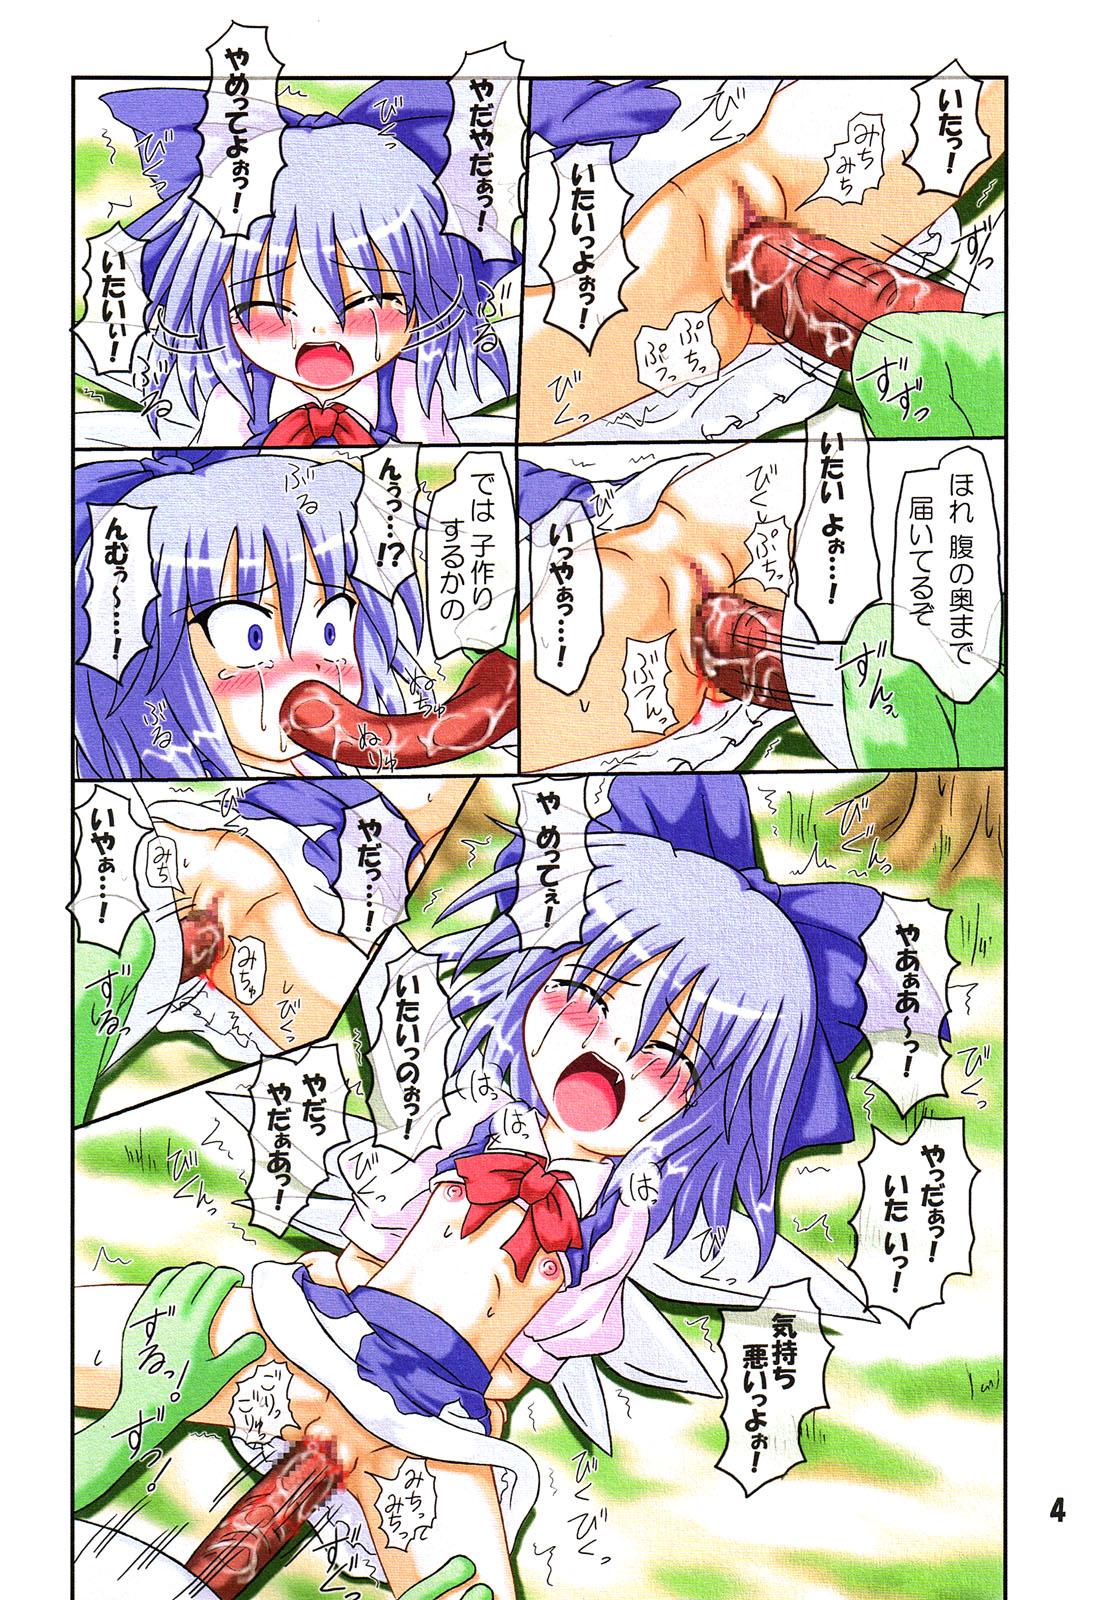 Gemidos Rollin 22 - Touhou project Pervert - Page 3